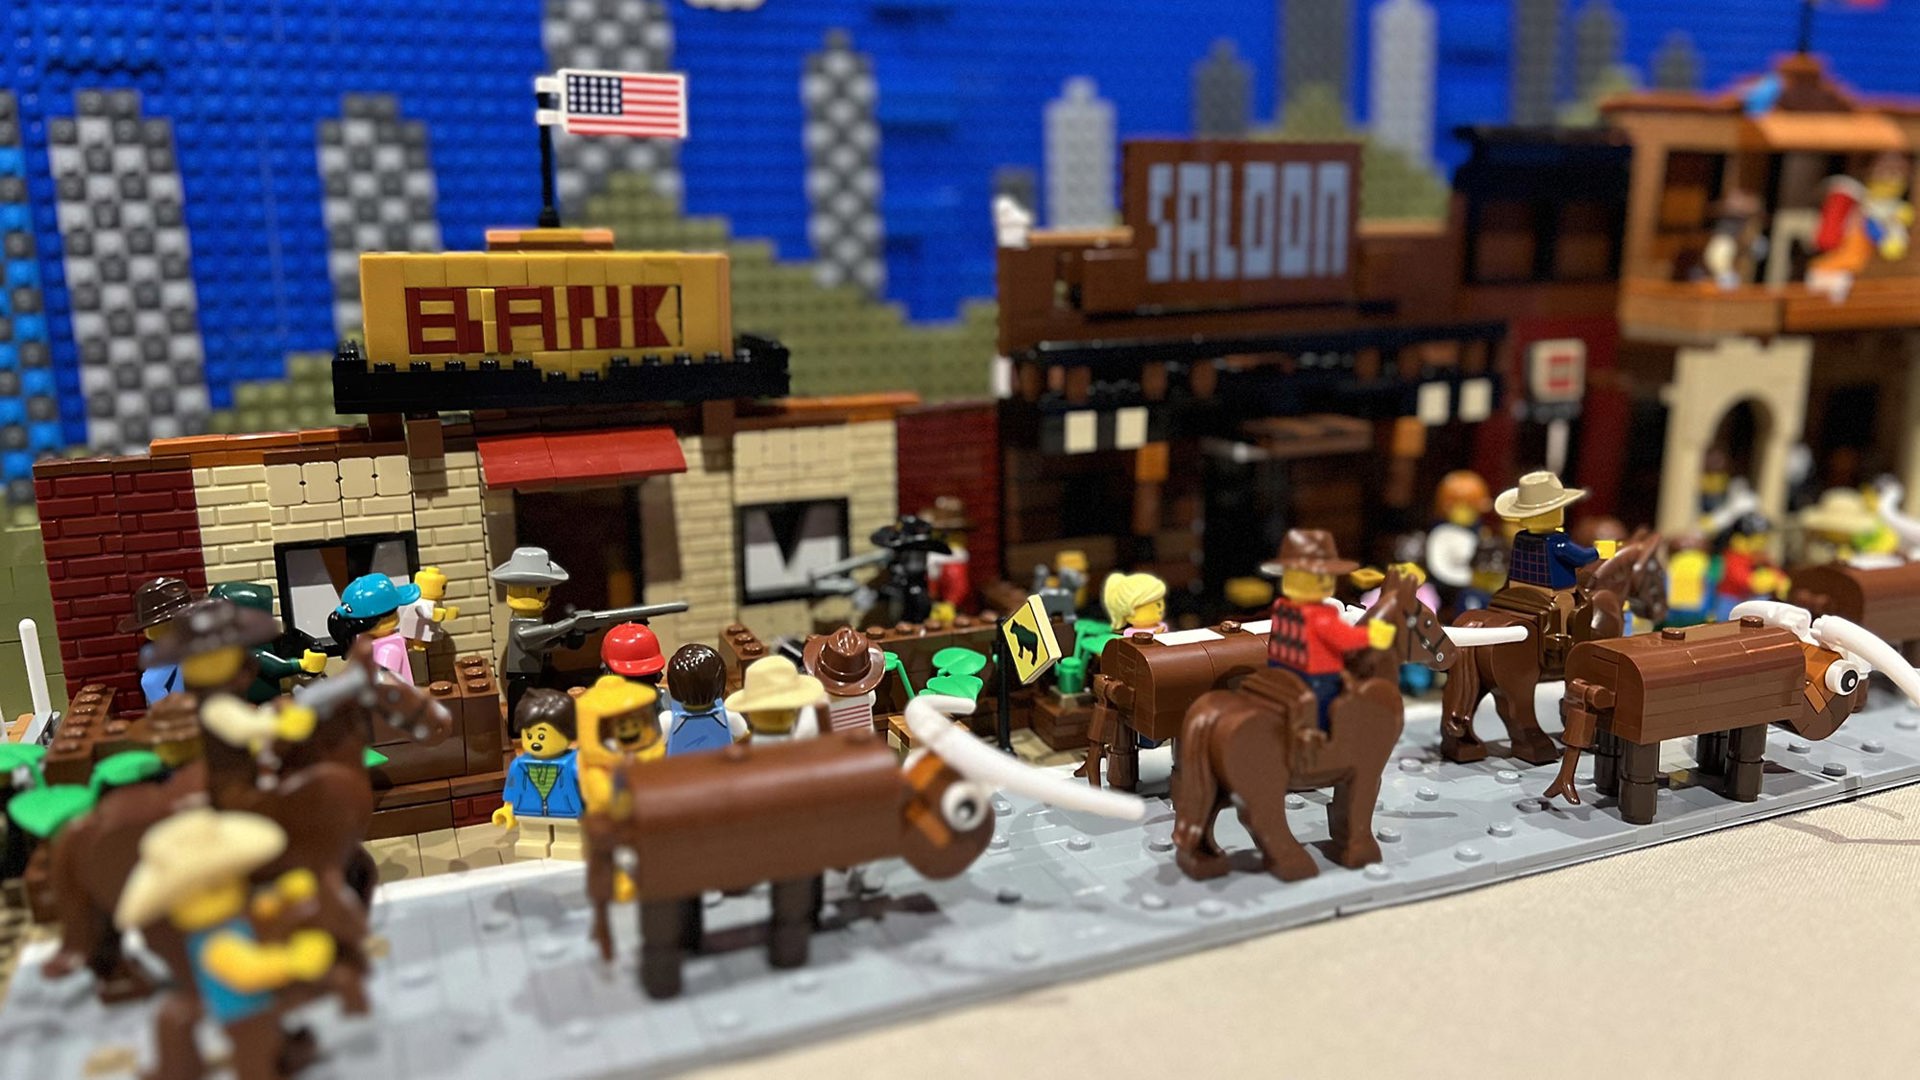 Grapevine resident William Hicks' build featured 6,000 pieces over 45 hours, winning him the title of 2024 Mini Master Model Builder.